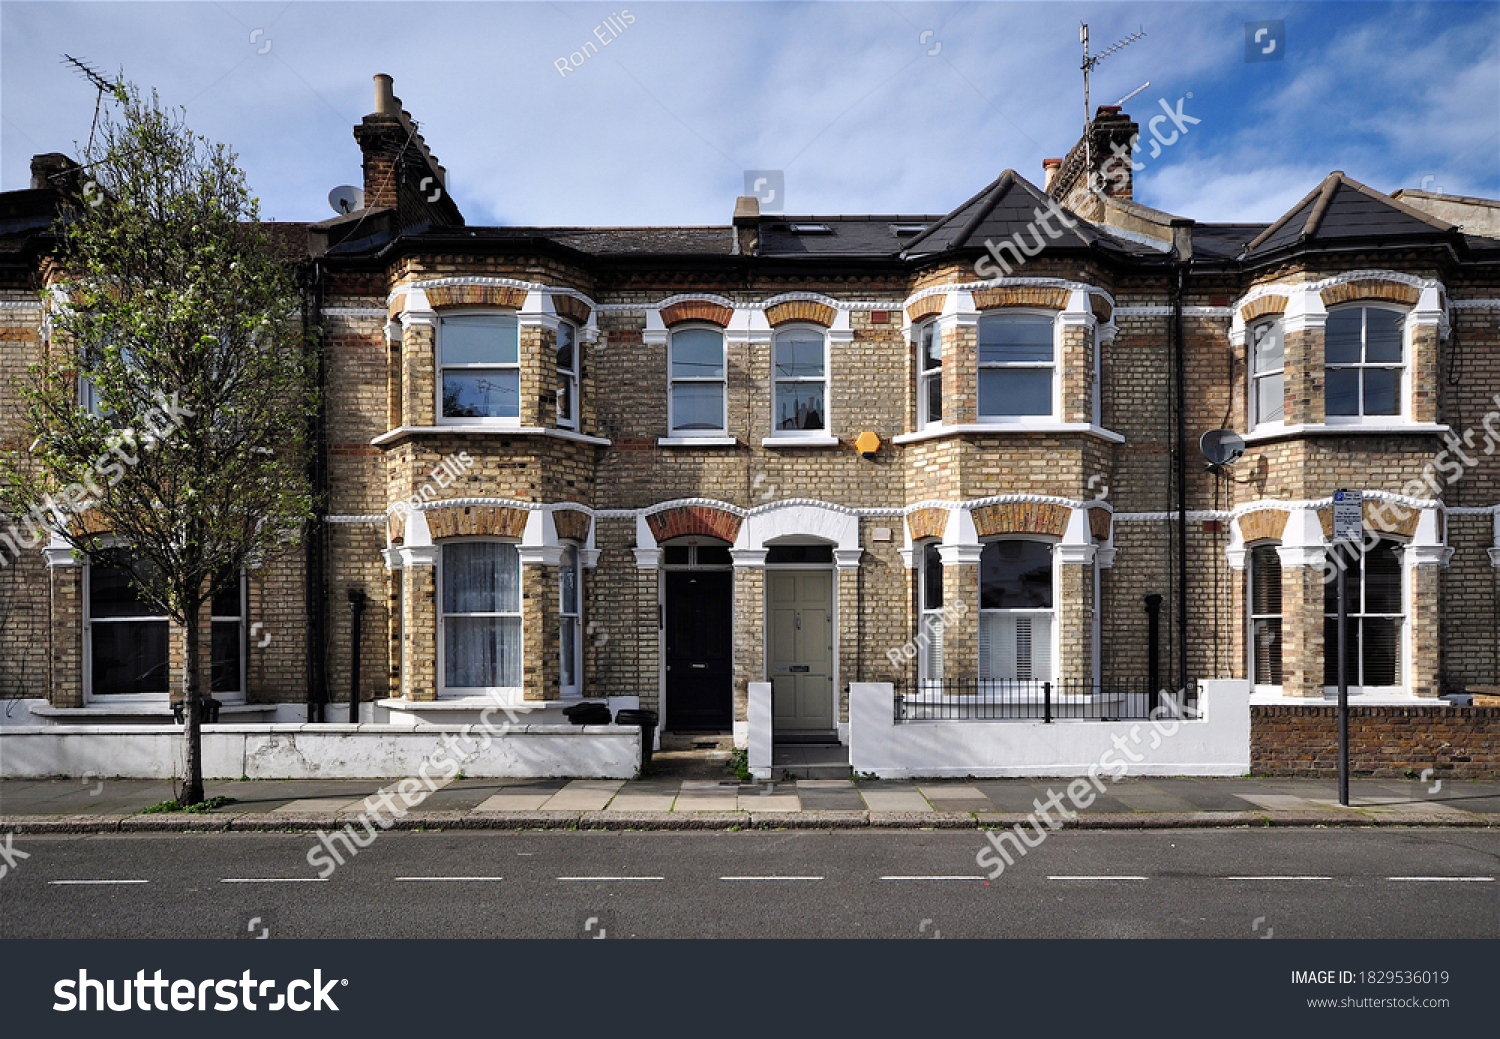 A terrace of Victorian period houses in west London, UK. #1829536019